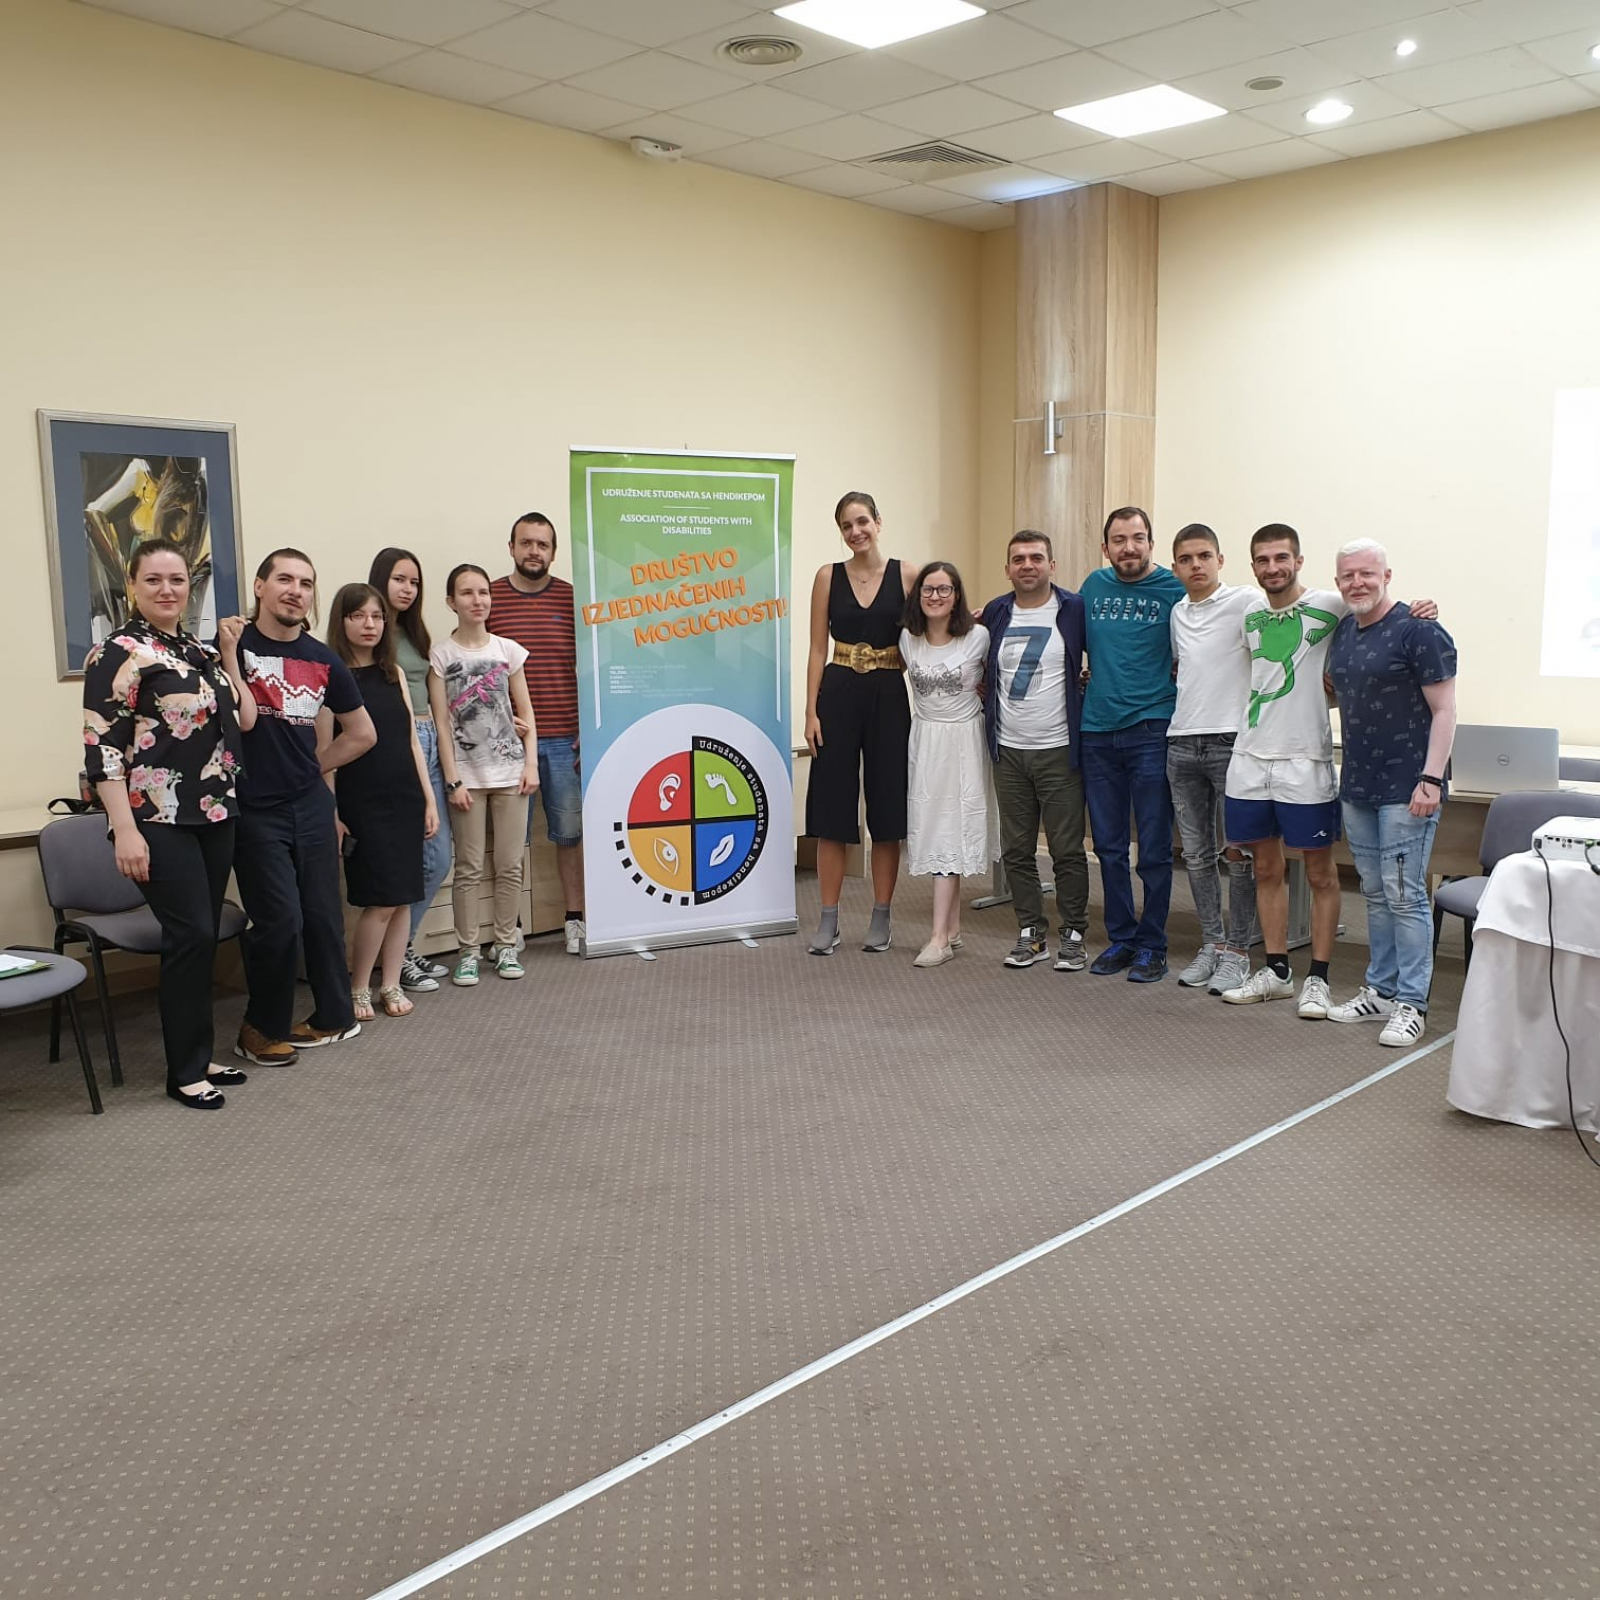 Building a Cross-Disability Network to Advance Disability Rights in Serbia